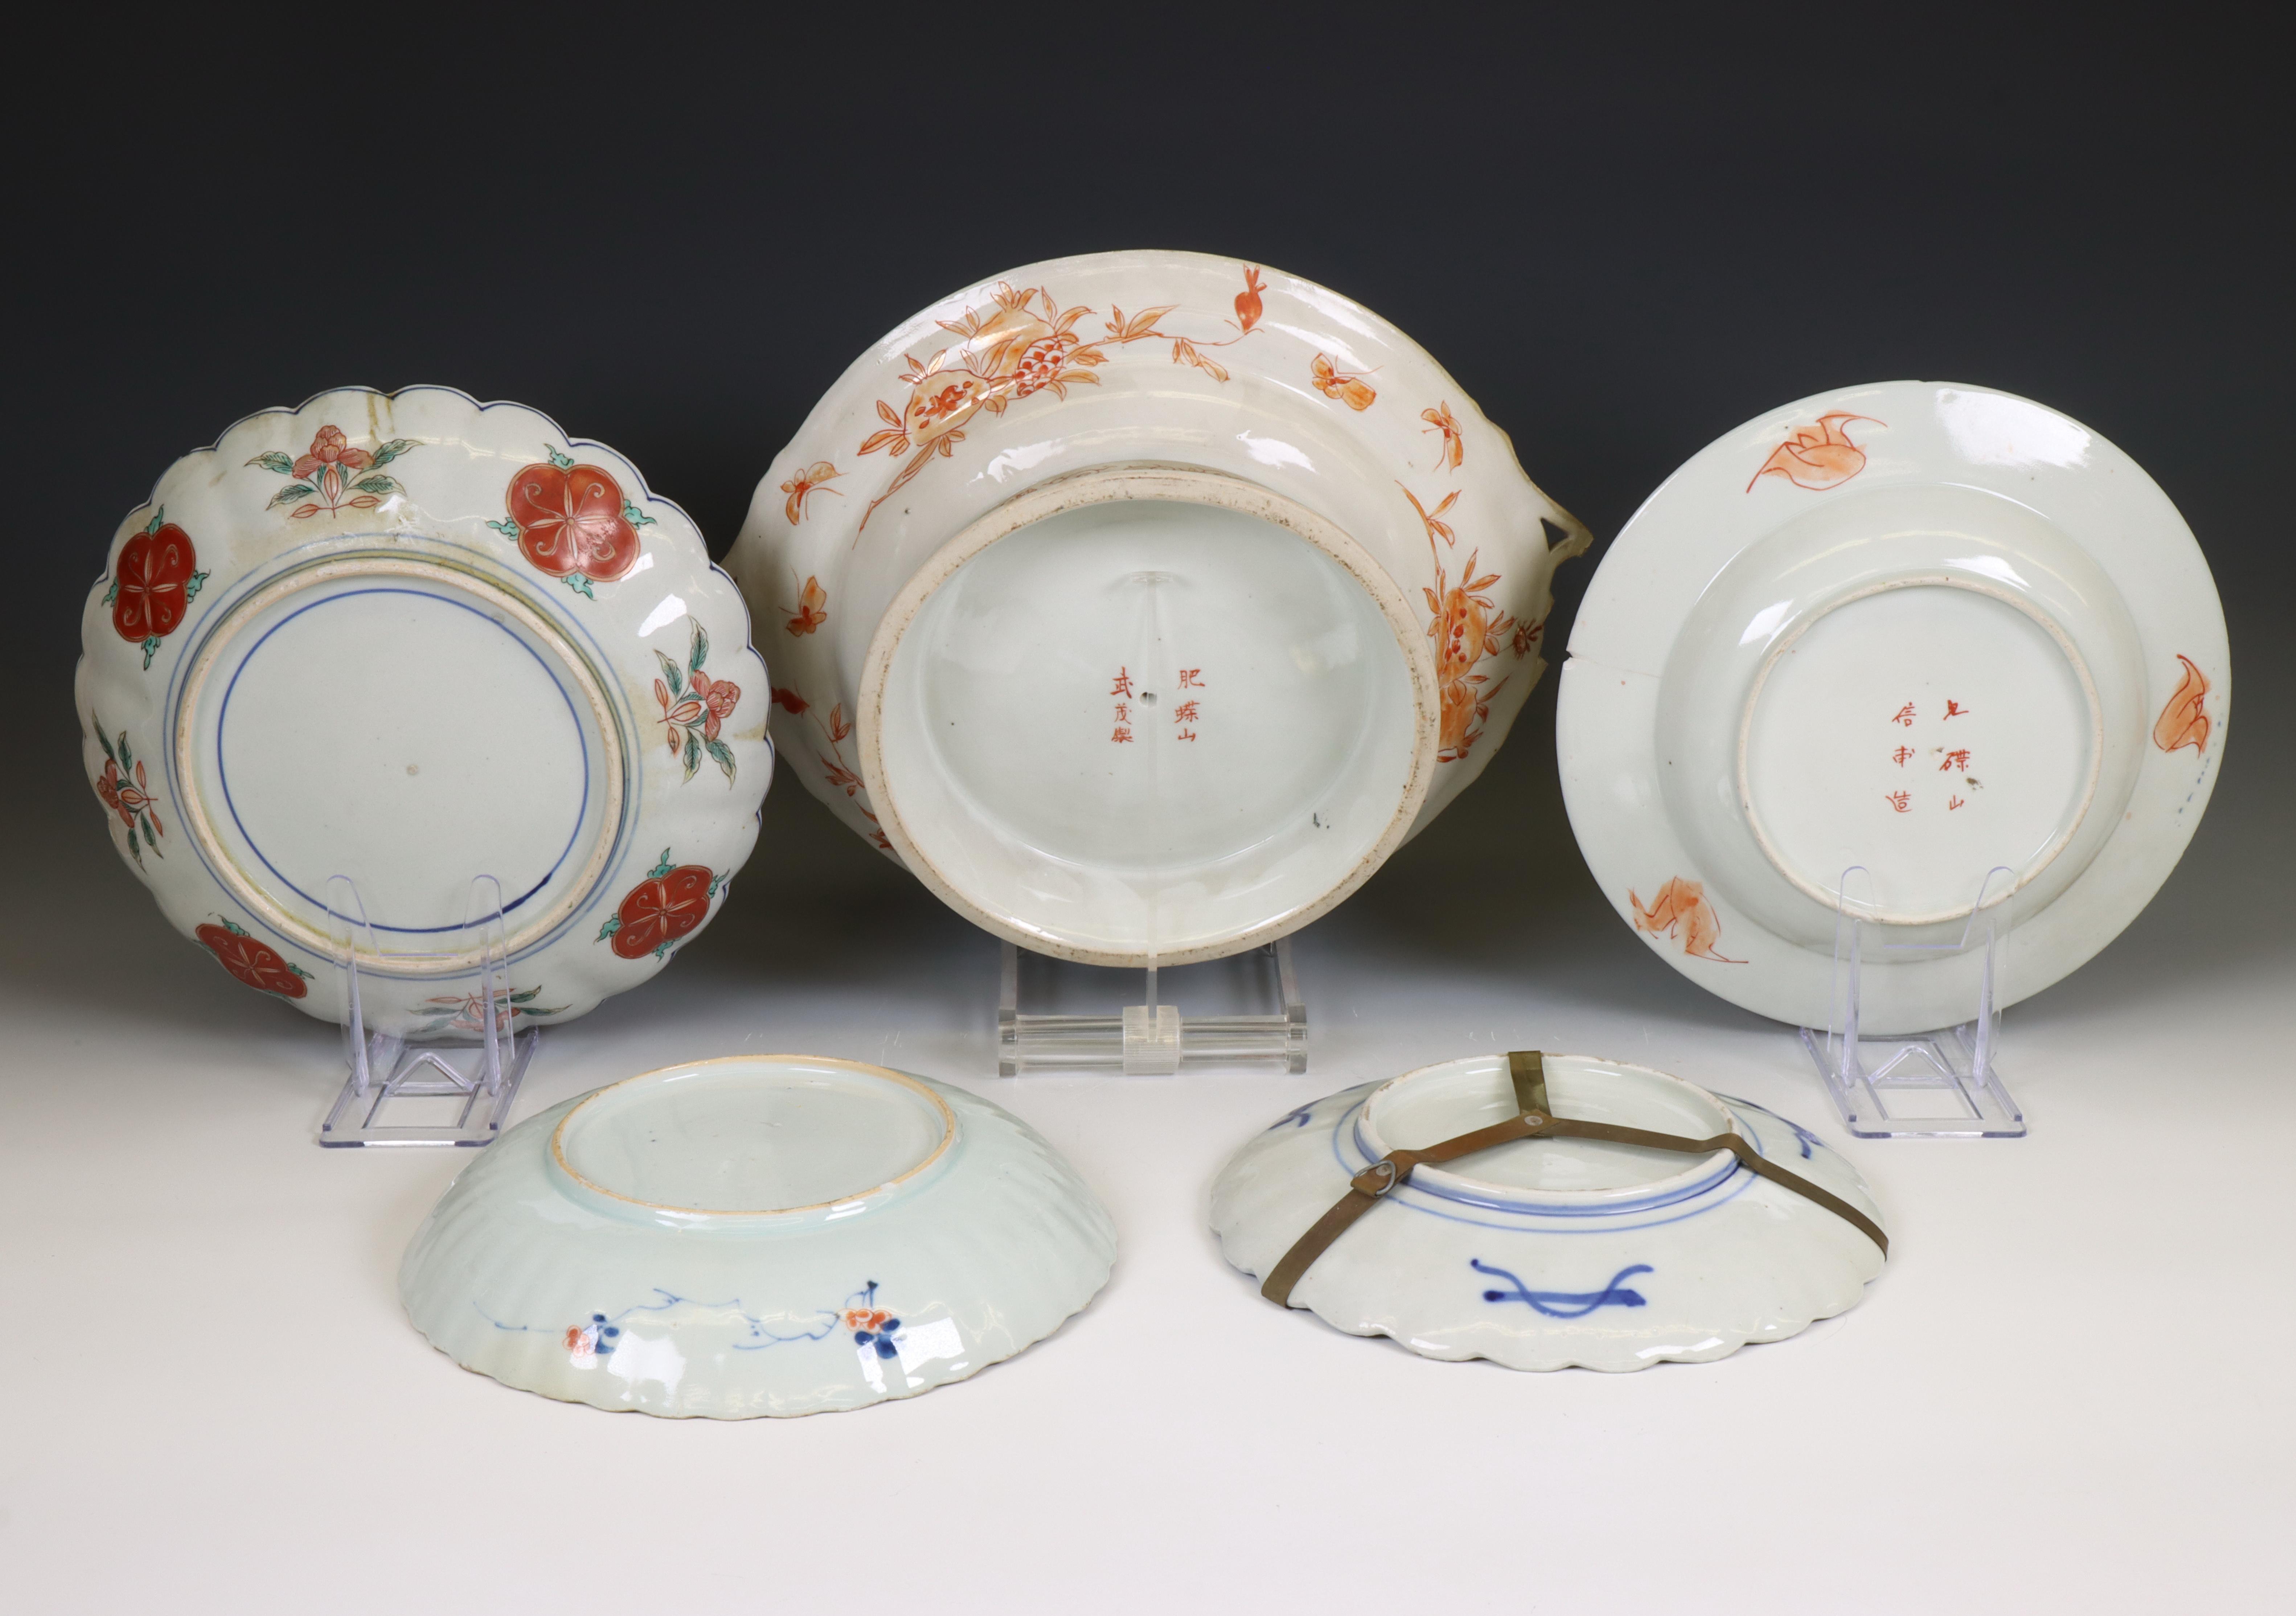 Japan, a collection of Imari porcelain plates and a tazza, 19th century, - Image 2 of 2